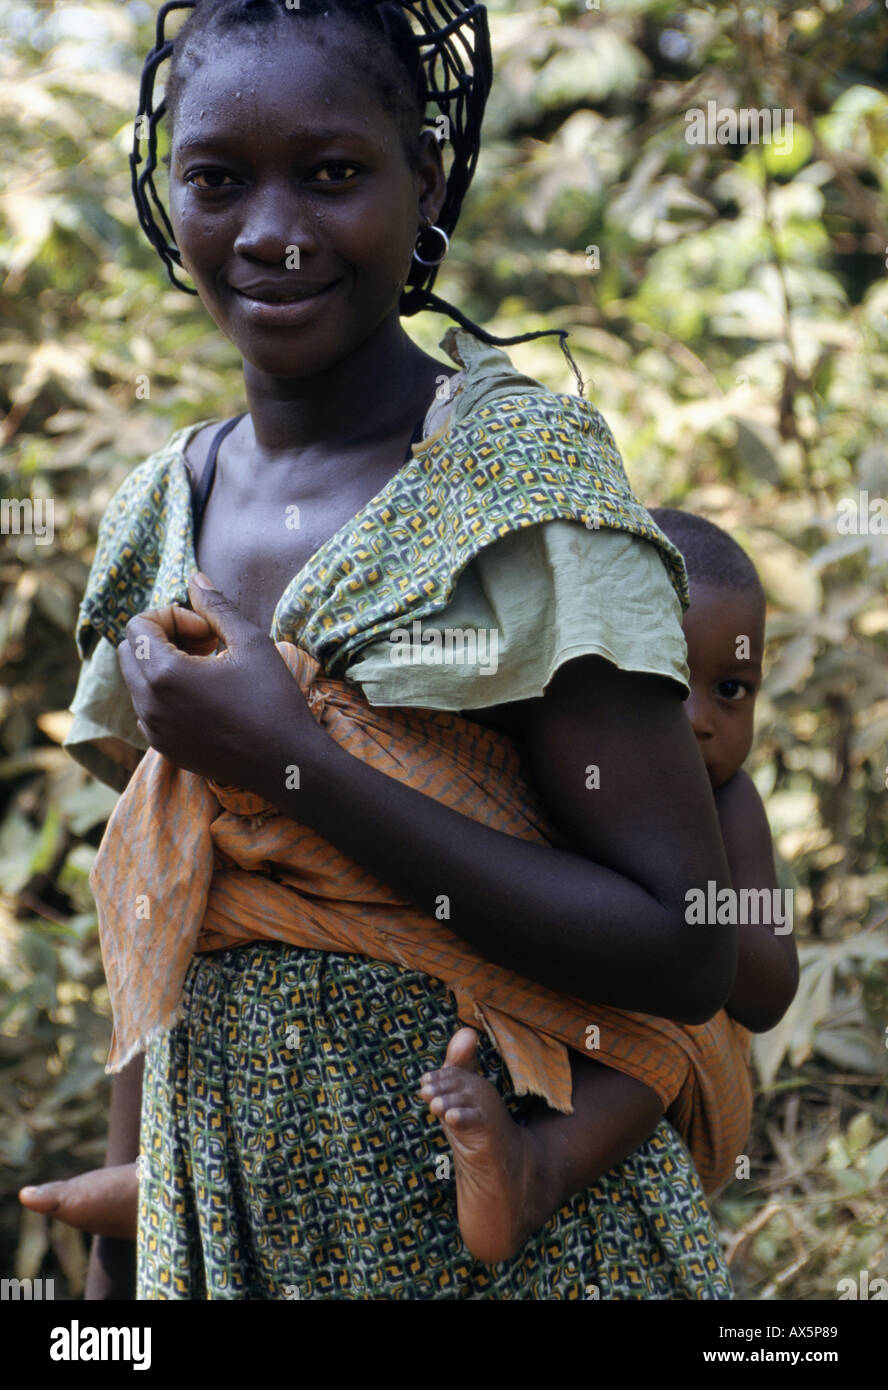 la-gongue-gabon-young-gabonese-rural-women-with-her-baby-in-a-sling-AX5P89.jpg